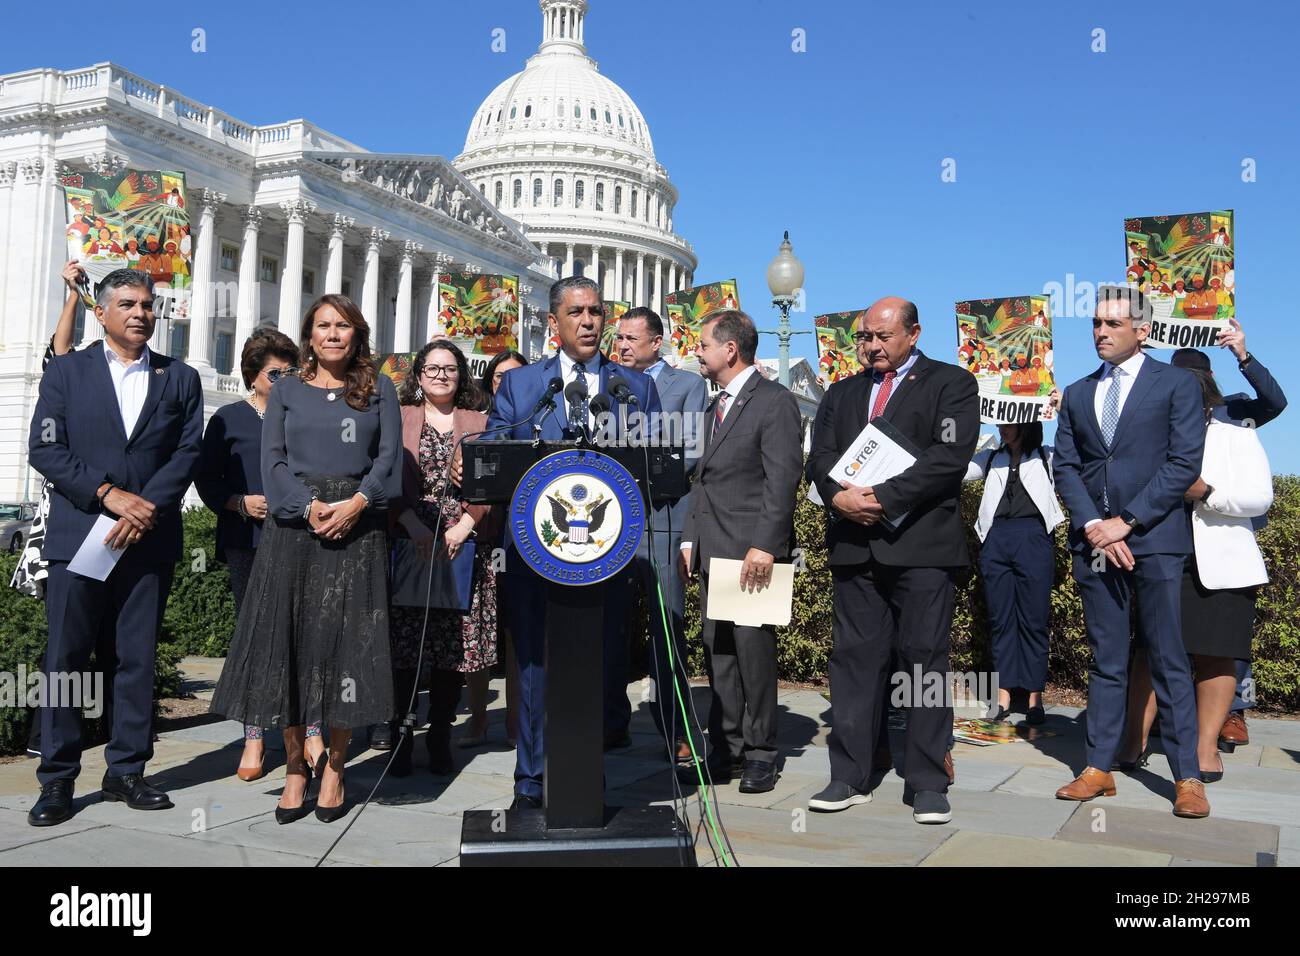 Washington Dc, United States. 20th Oct, 2021. US Representative, Adriano Espaillat (D-NY) alongside other House members talk about Protection for Undocumented Communities during a press conference at House Triangle/Capitol Hill. (Photo by L Nolly/SOPA Images/Sipa USA) Credit: Sipa USA/Alamy Live News Stock Photo